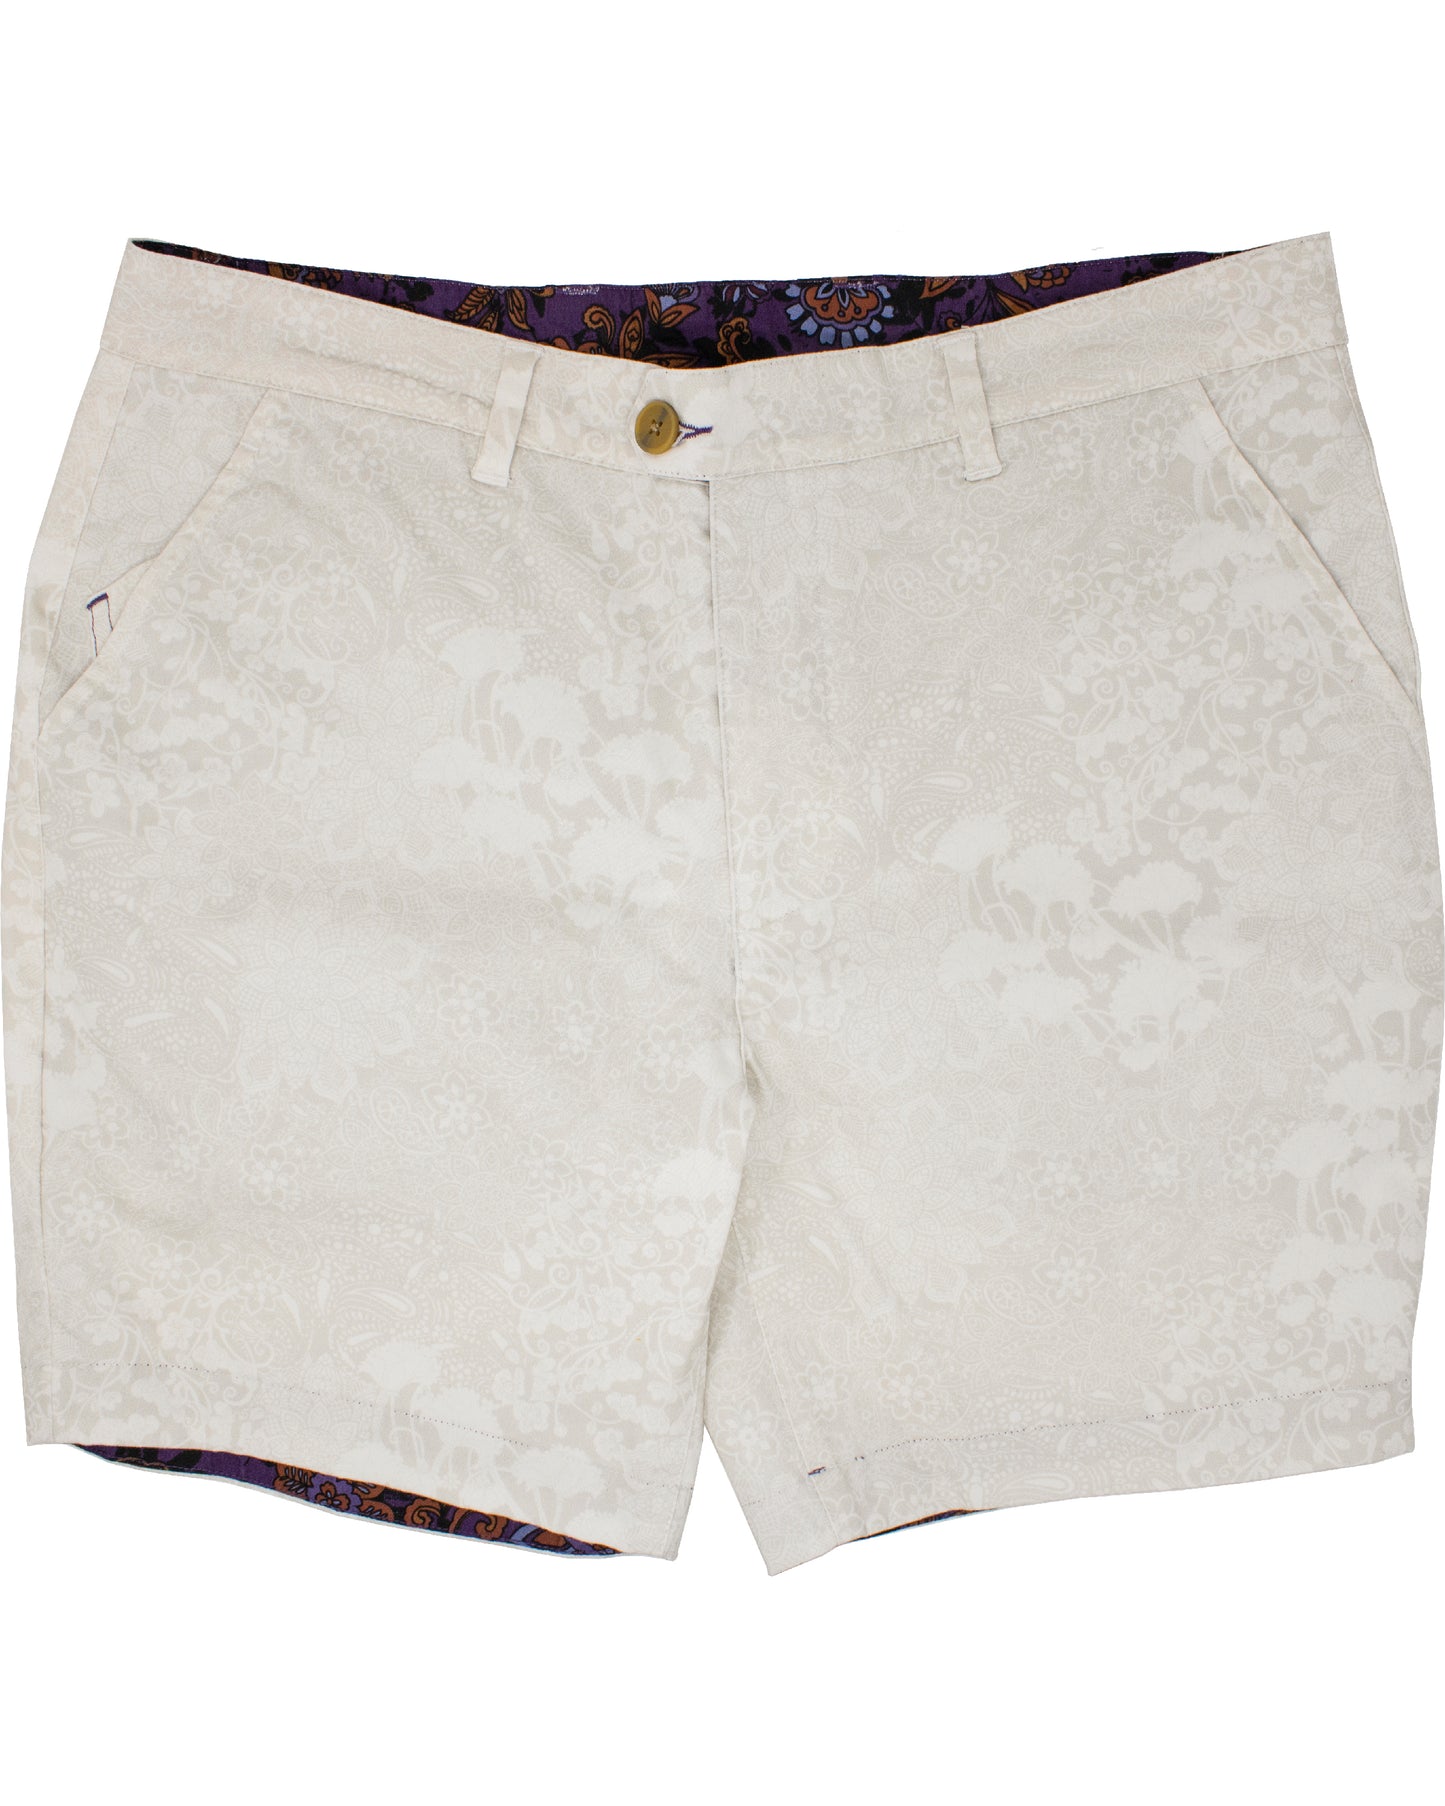 John Lux Paisley Floral Pumice Shorts